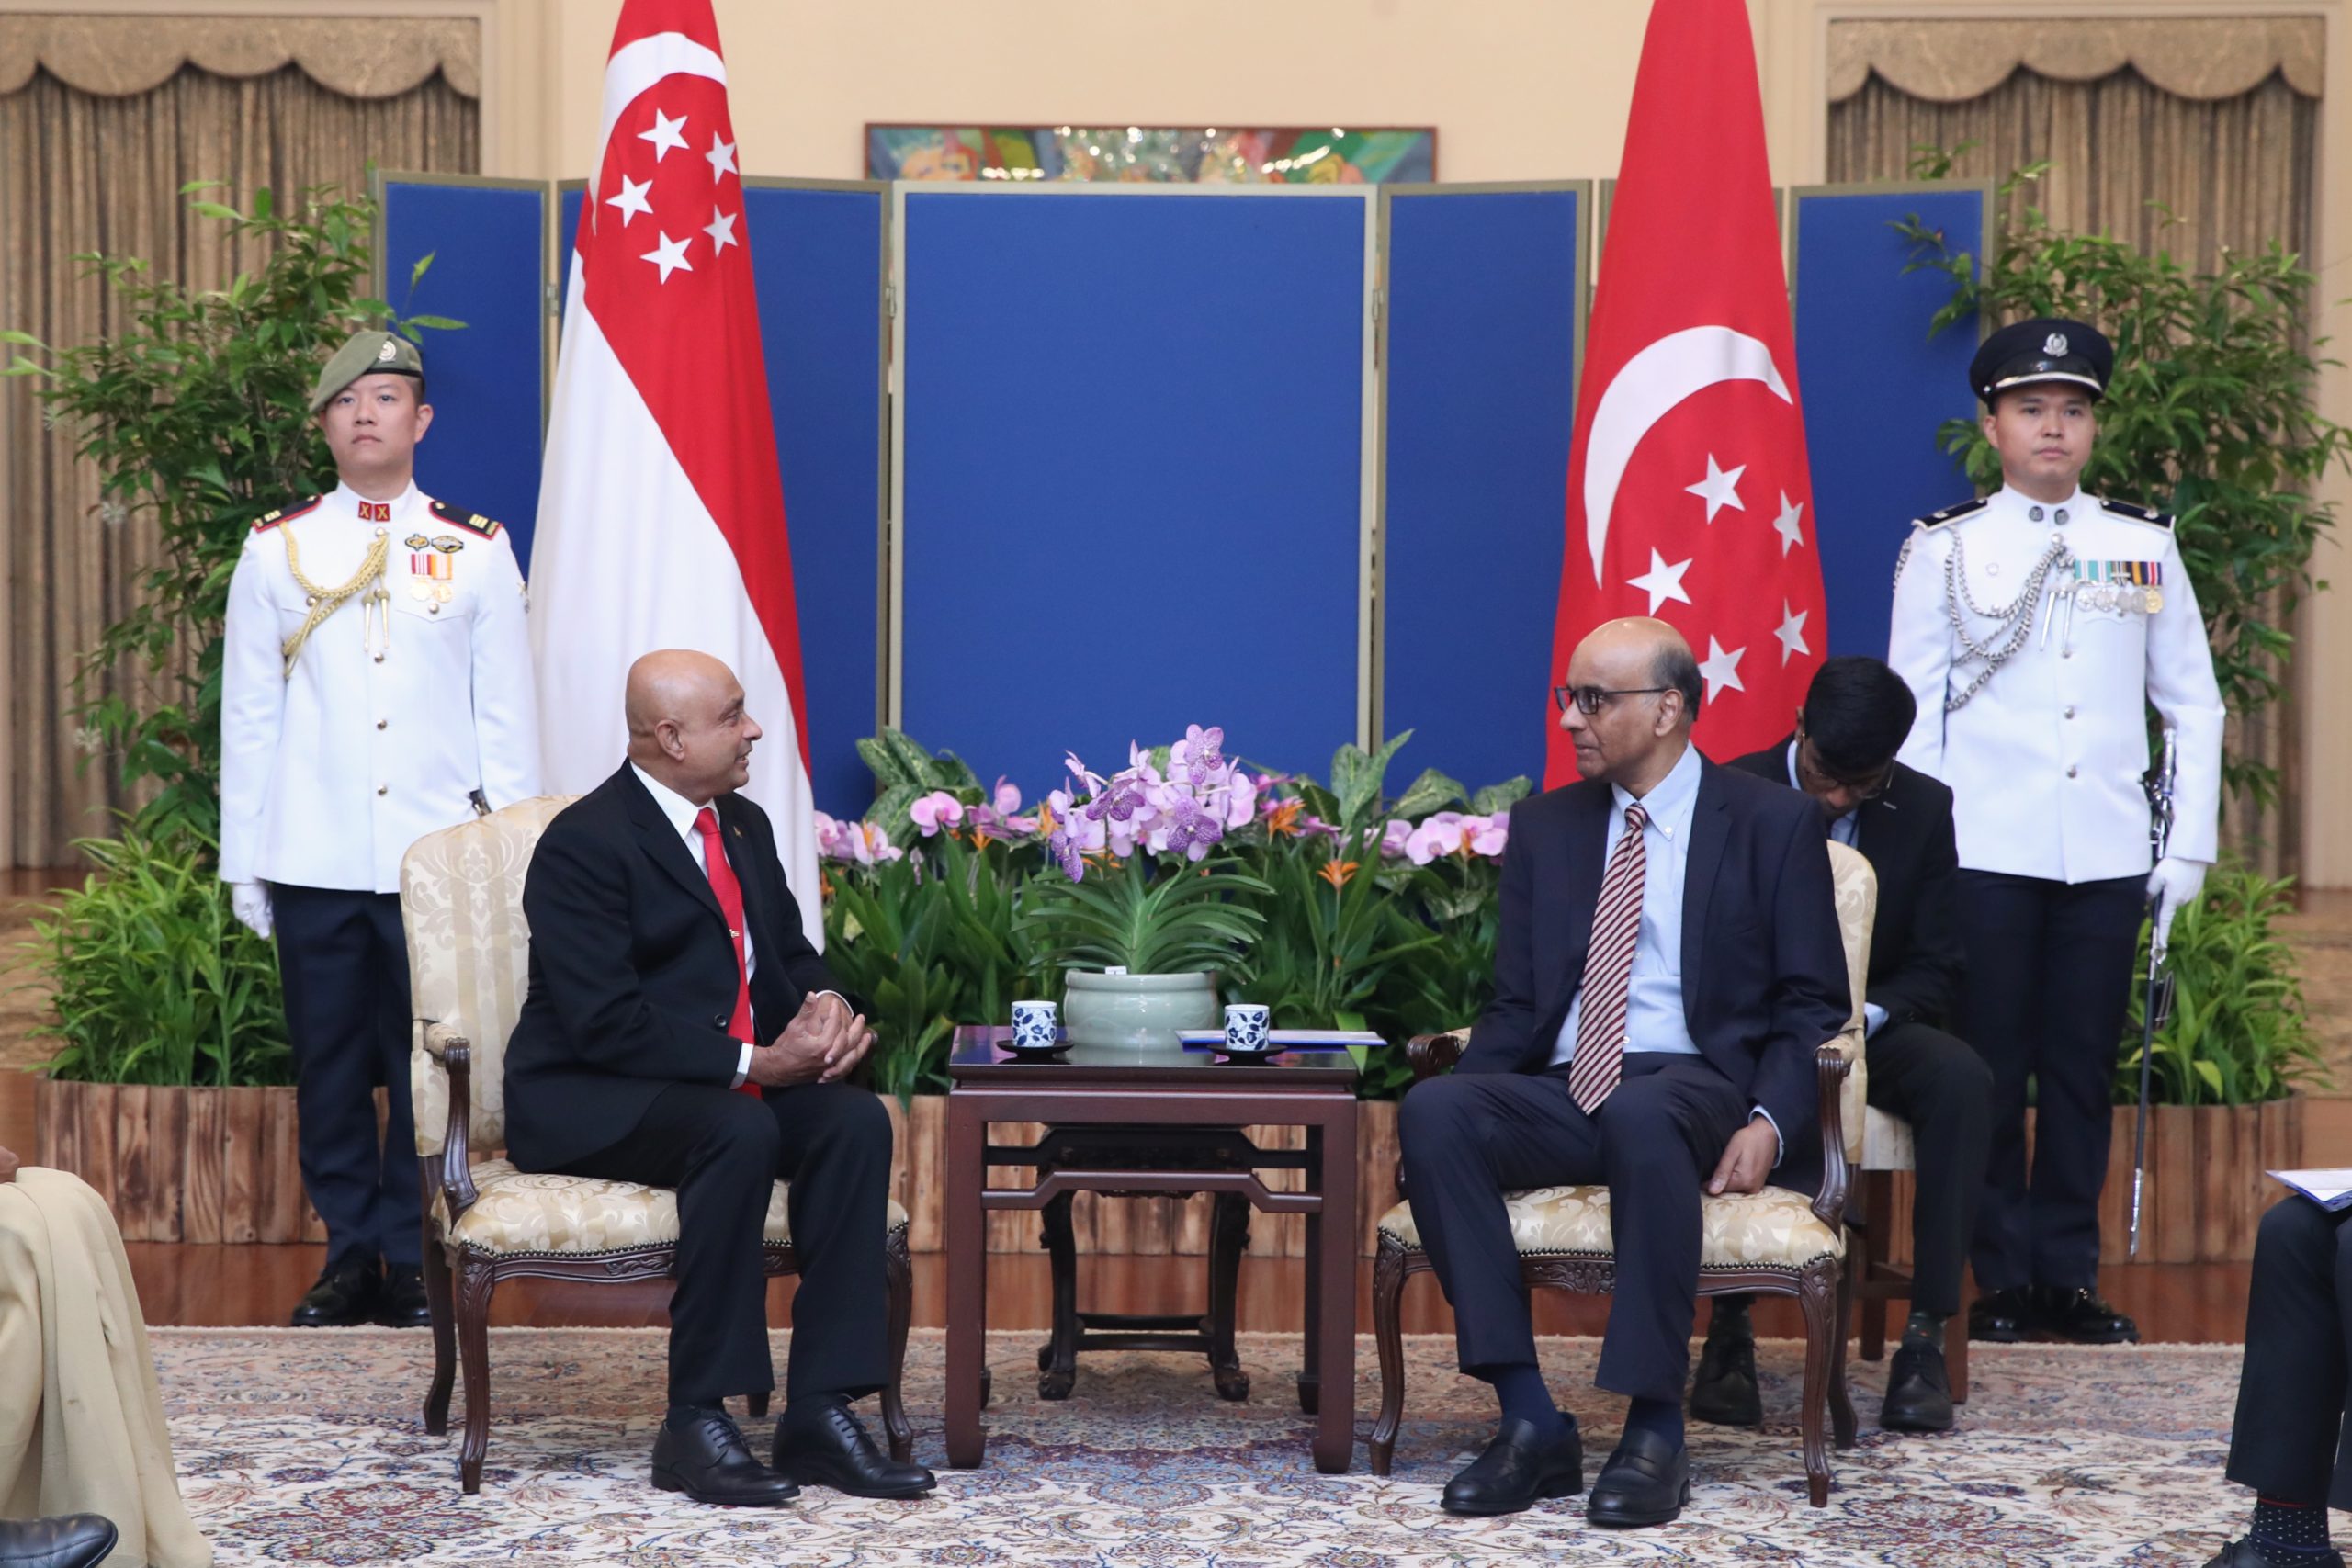 High Commissioner Senarath Dissanayake Presents Credentials to the President of Singapore